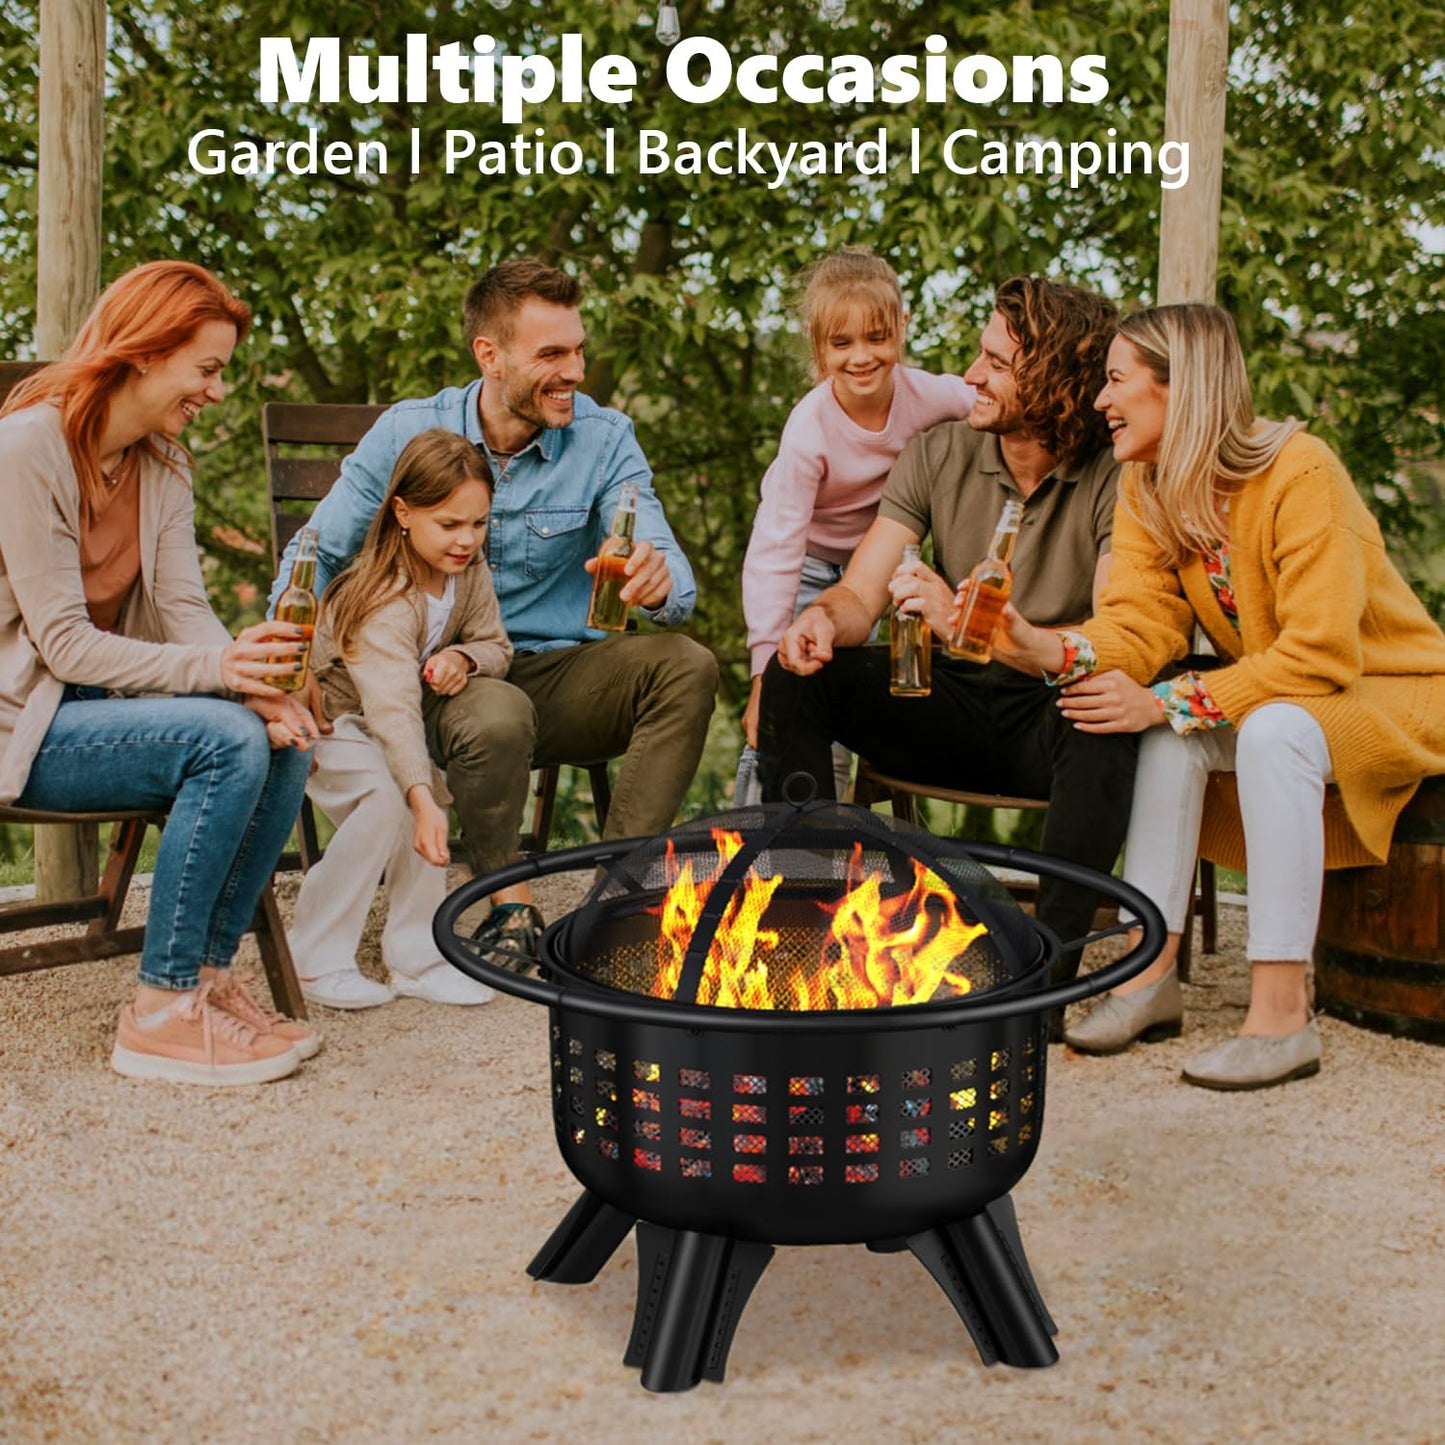 Raxmolo 31 Inch Fire Pit for Outside, Outdoor Wood Burning Firepit Large Steel Firepit Bowl for Garden Patio Backyard Picnic Camping